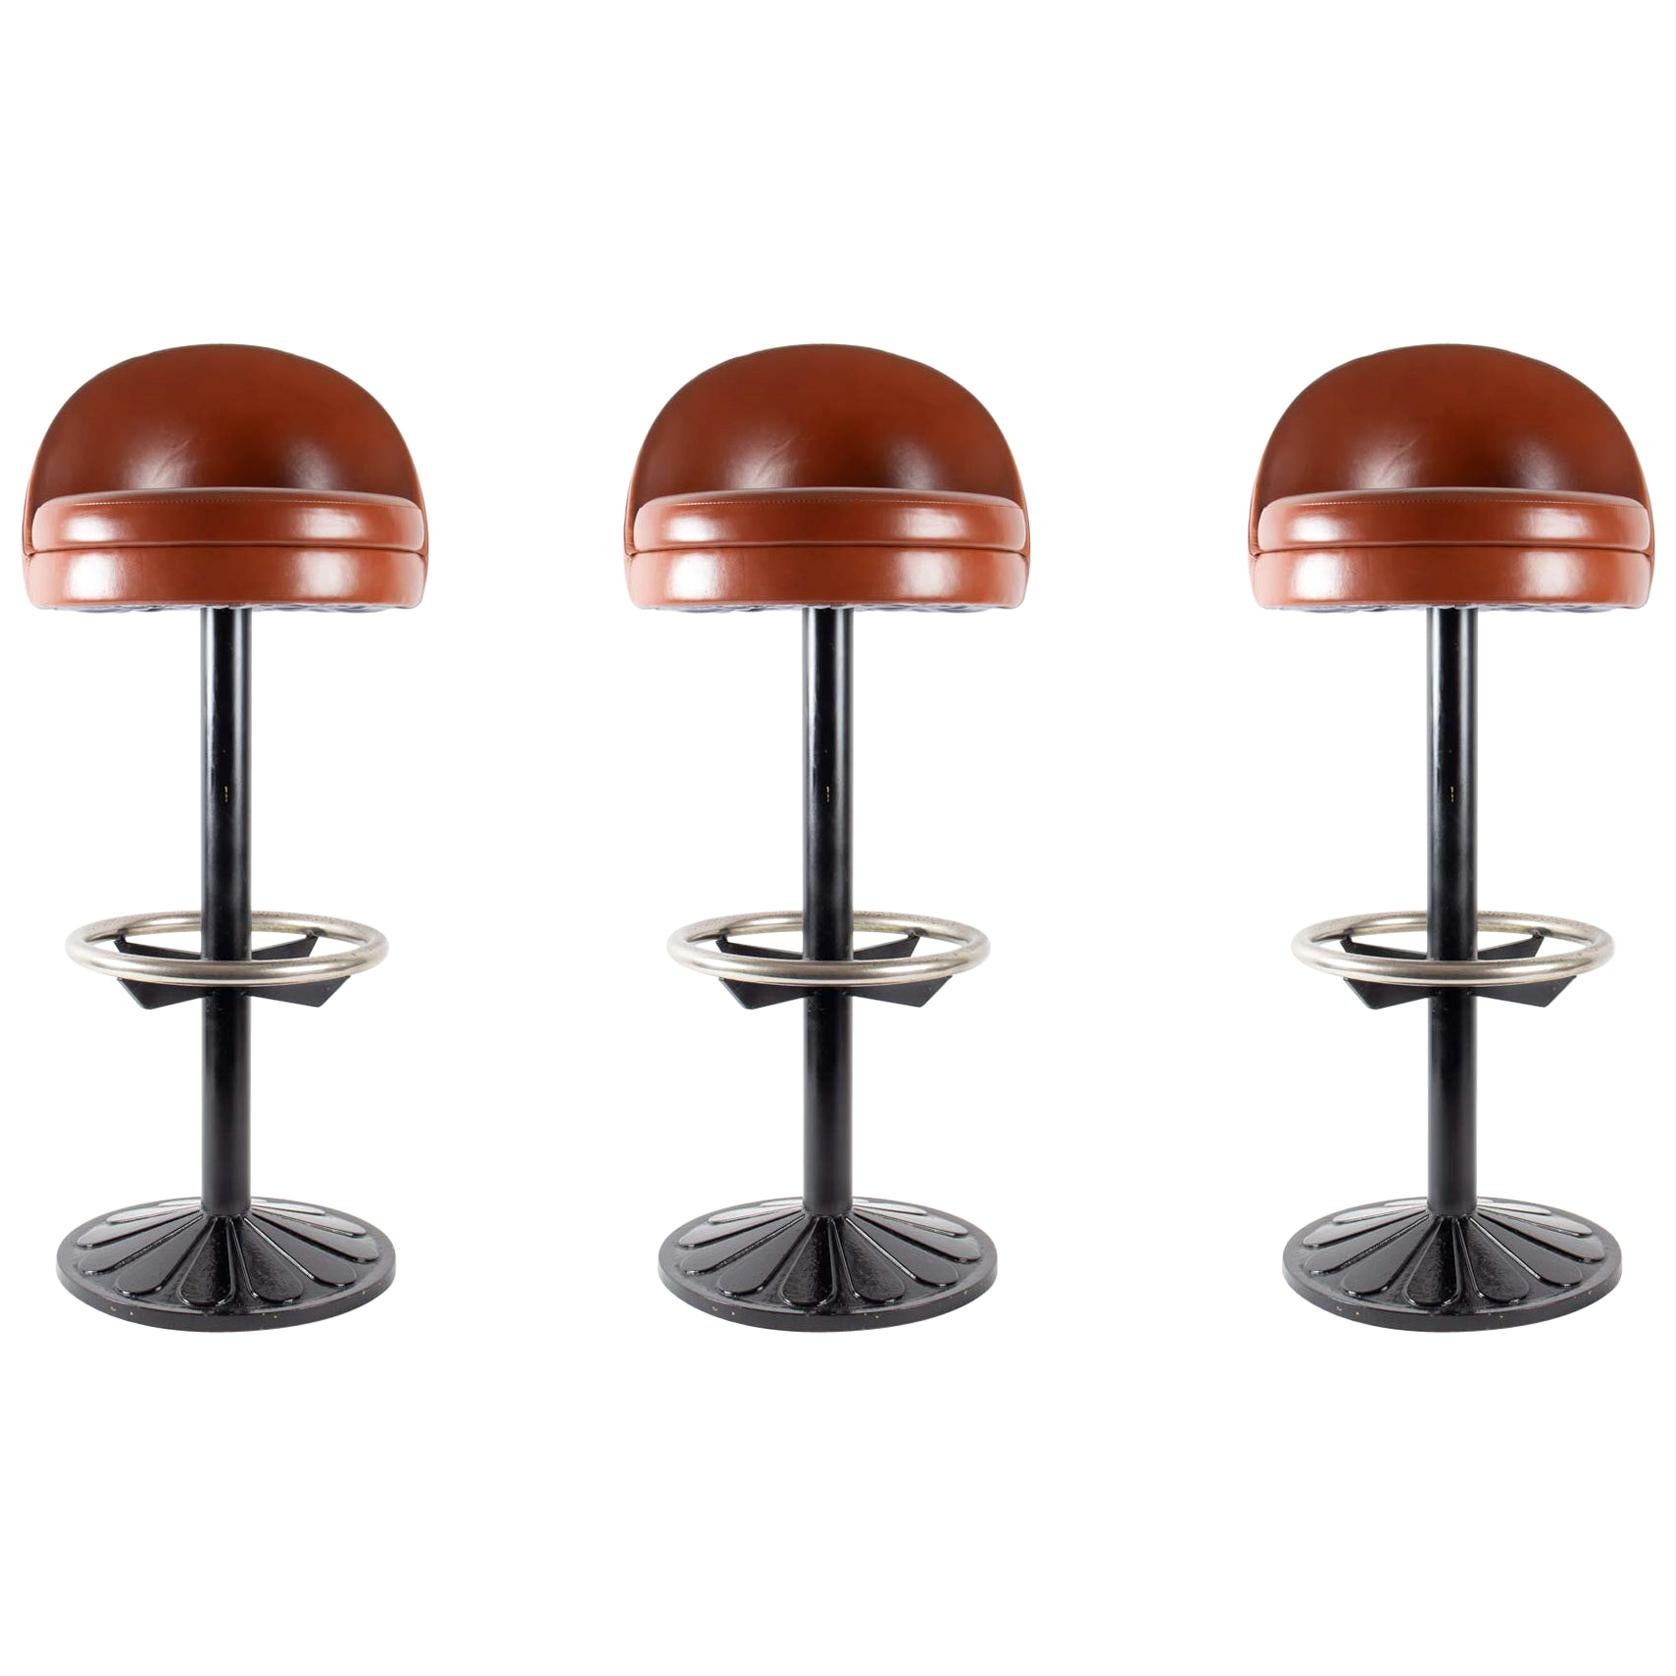 Suite of 3-Bar Stools in Steel and Leather, 1920, Cast Iron and Steel